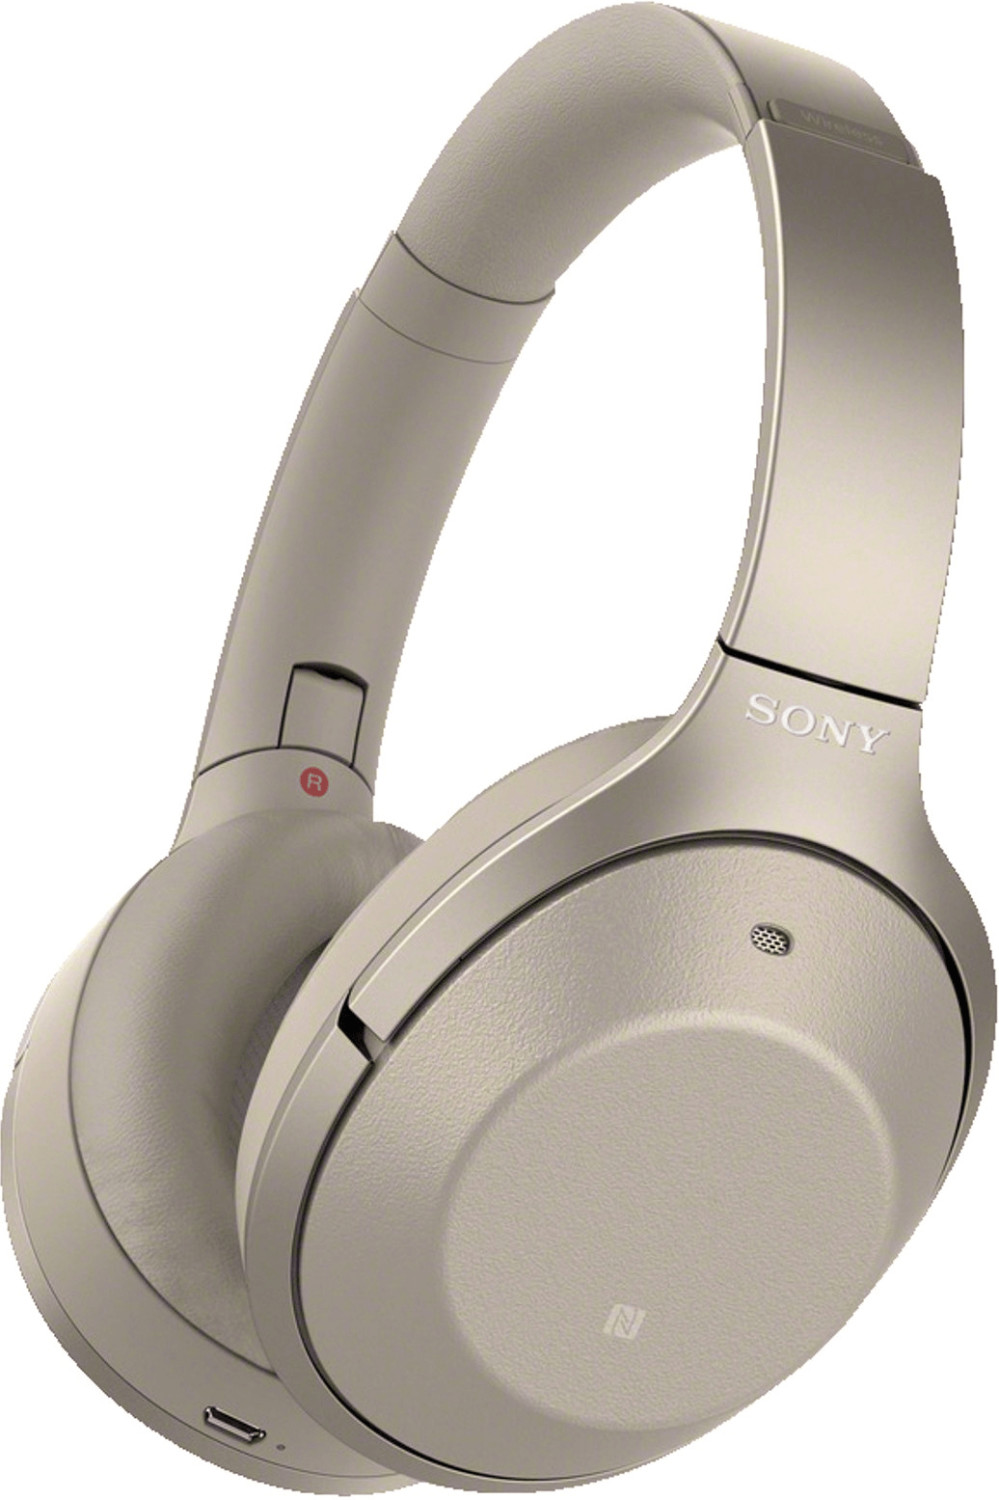 Buy Sony WH-1000XM2 from £239.99 (Today) – Best Deals on 